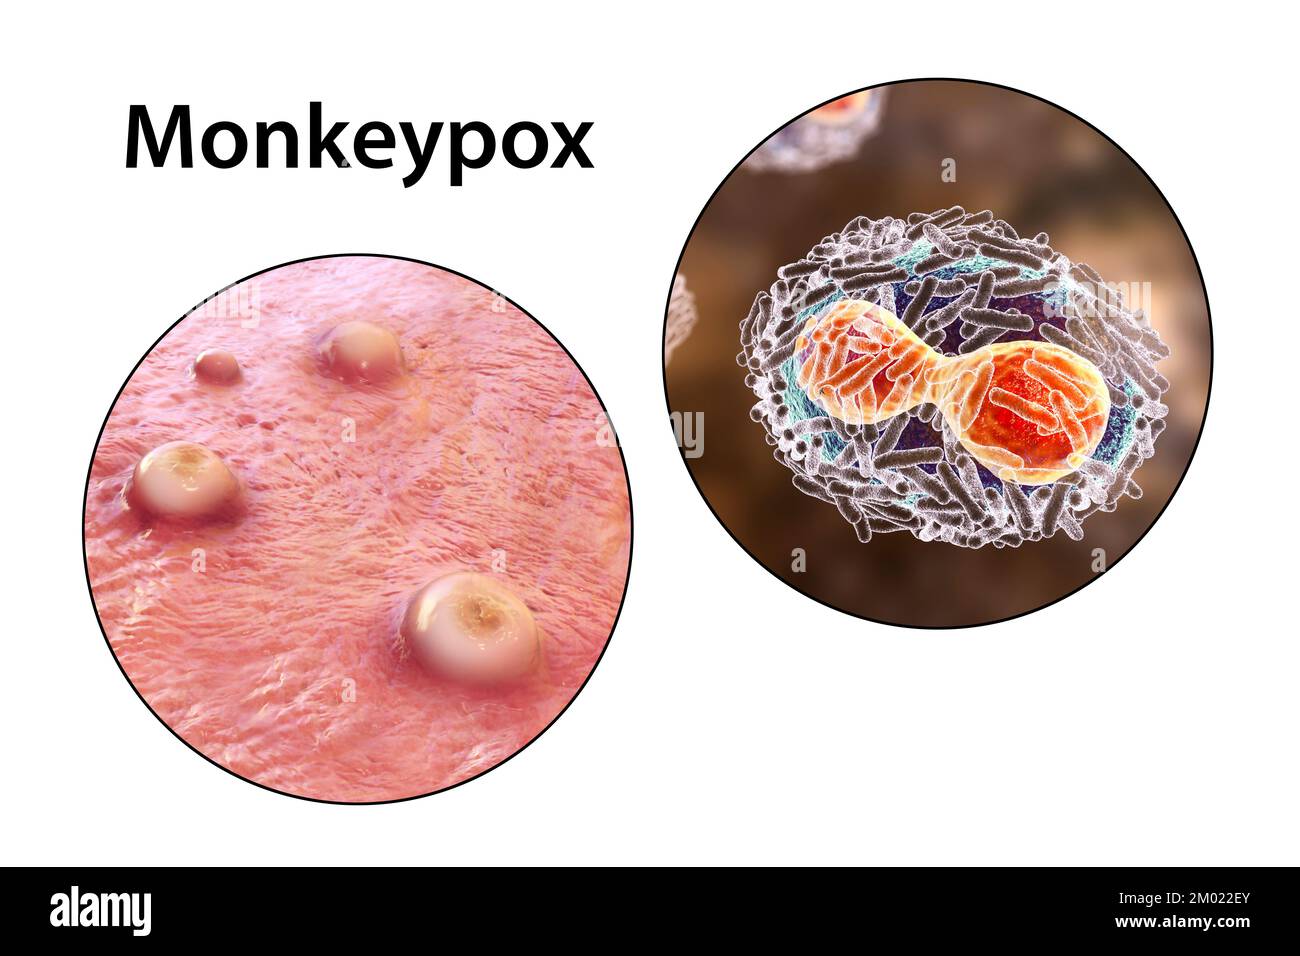 Skin lesions in monkeypox infection and close-up view of monkeypox virus particles, computer illustration. Monkeypox virus is found near rainforests i Stock Photo